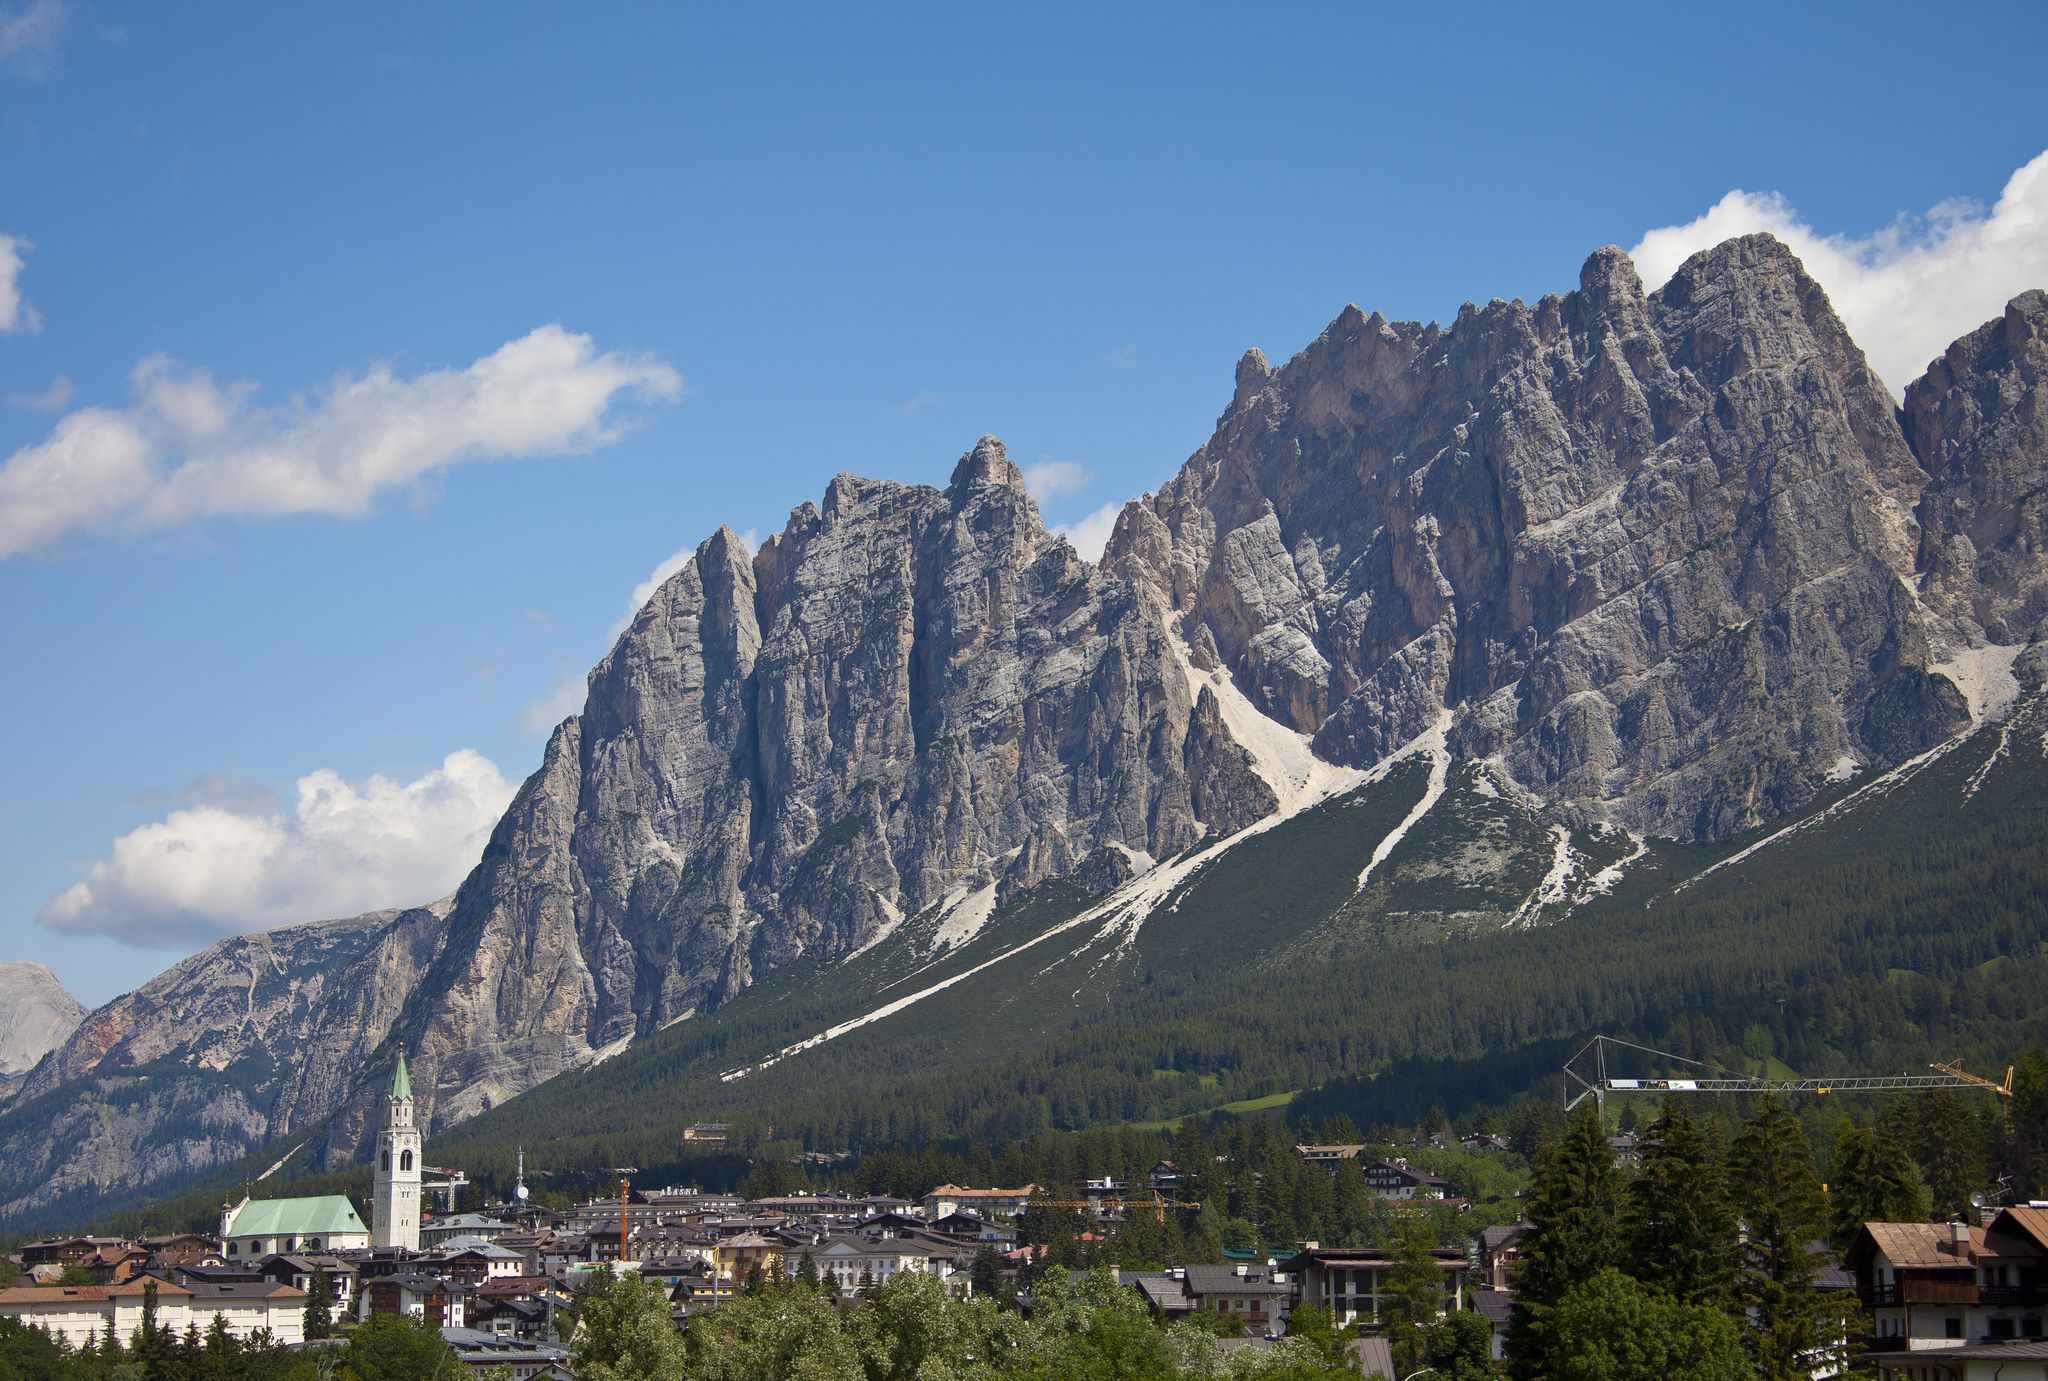 cortina dampezzo, italy   july 04 cityview with the dolomites and the church parrocchiale ss filippo e giacomo on july 04, 2011 in cortina dampezzo, dolomites, italy cortina is famous for skiing in winter and hiking, climbing, mountainbiking in summer  photo by eyeswideopen getty images